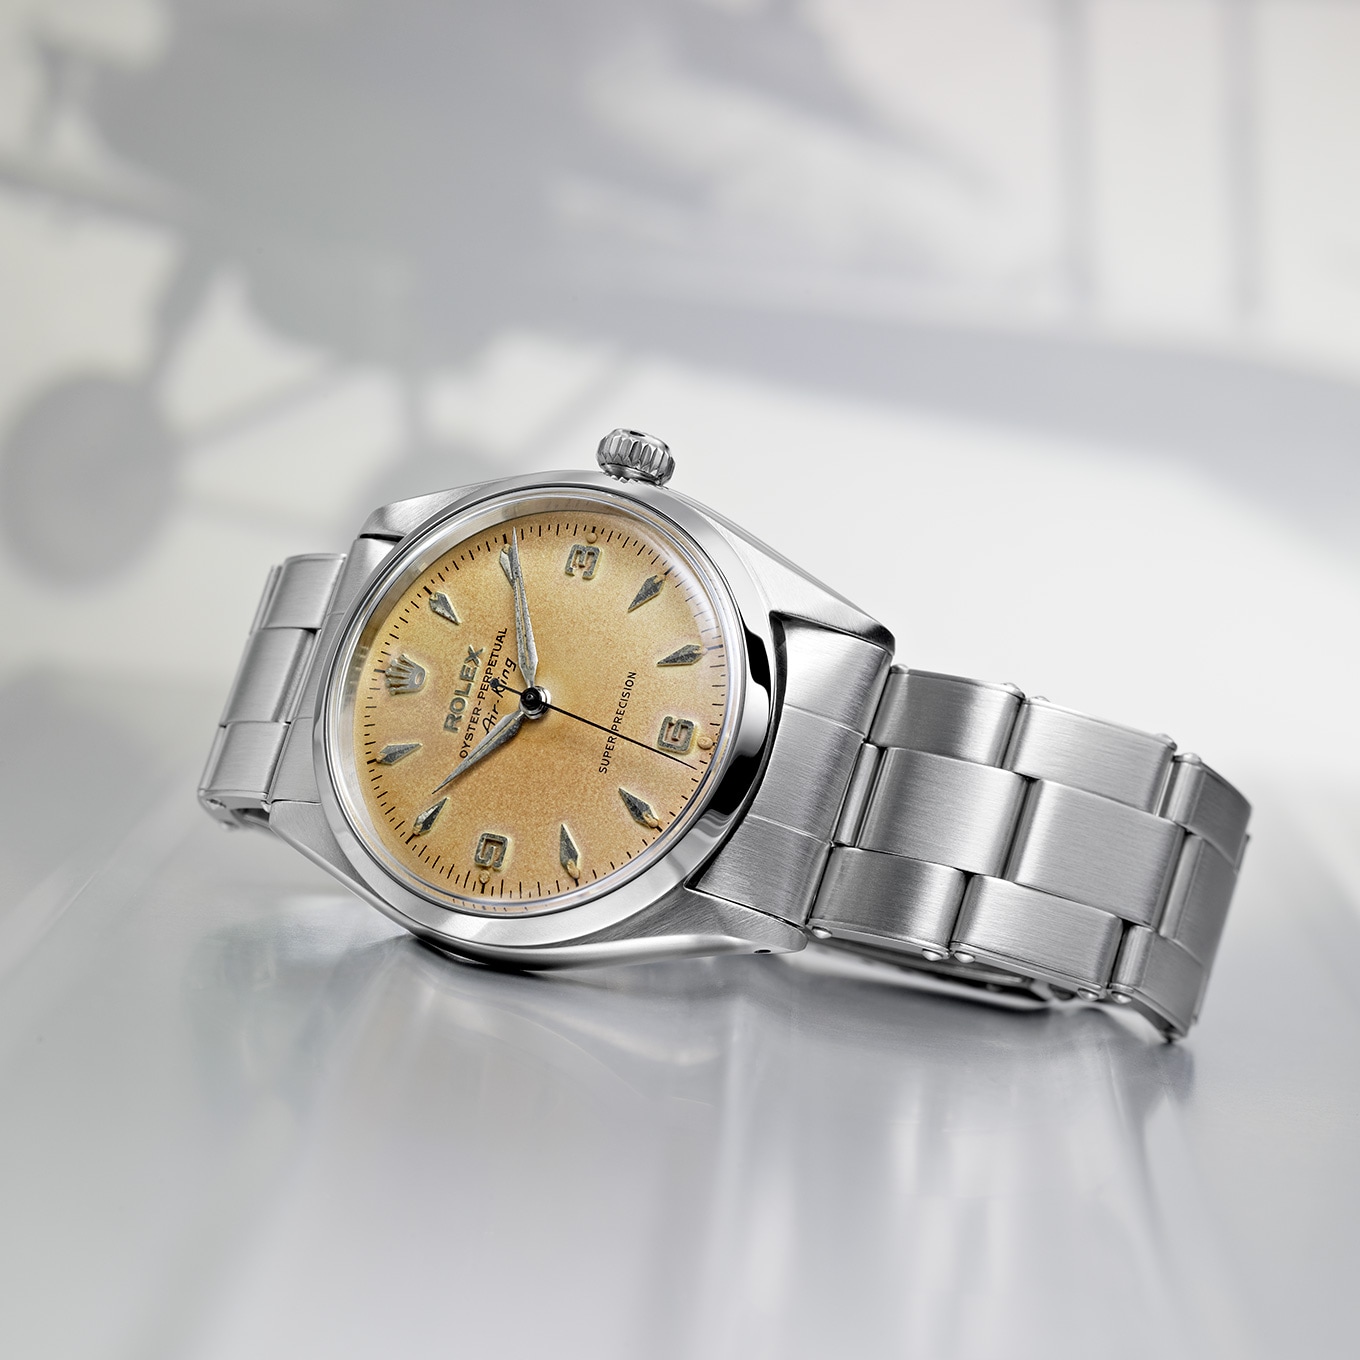 Rolex Datejust - ref:68273- Original M.O.P. dial, Rolesor Steel & 18kt yellow Gold, Box & Papers, 1993